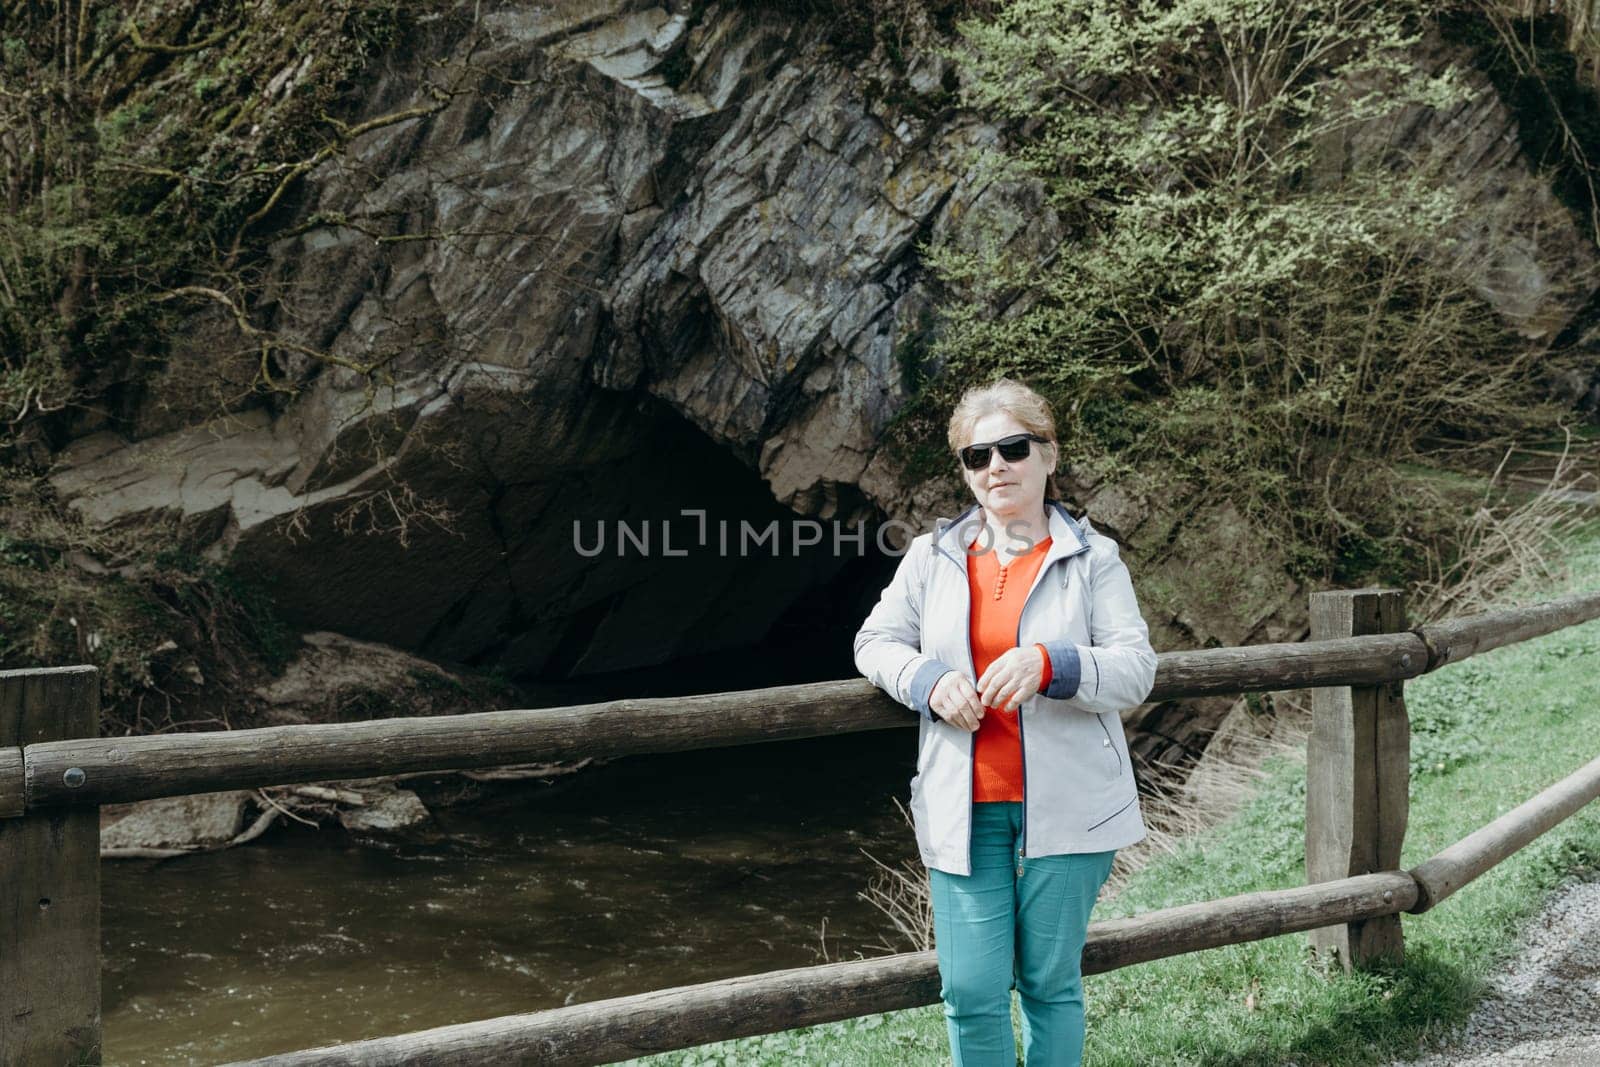 Portrait of a beautiful Caucasian elderly woman in sunglasses standing against the backdrop of a mountain cave with a river flowing into it on a sunny spring day in a nature reserve, close-up side view.